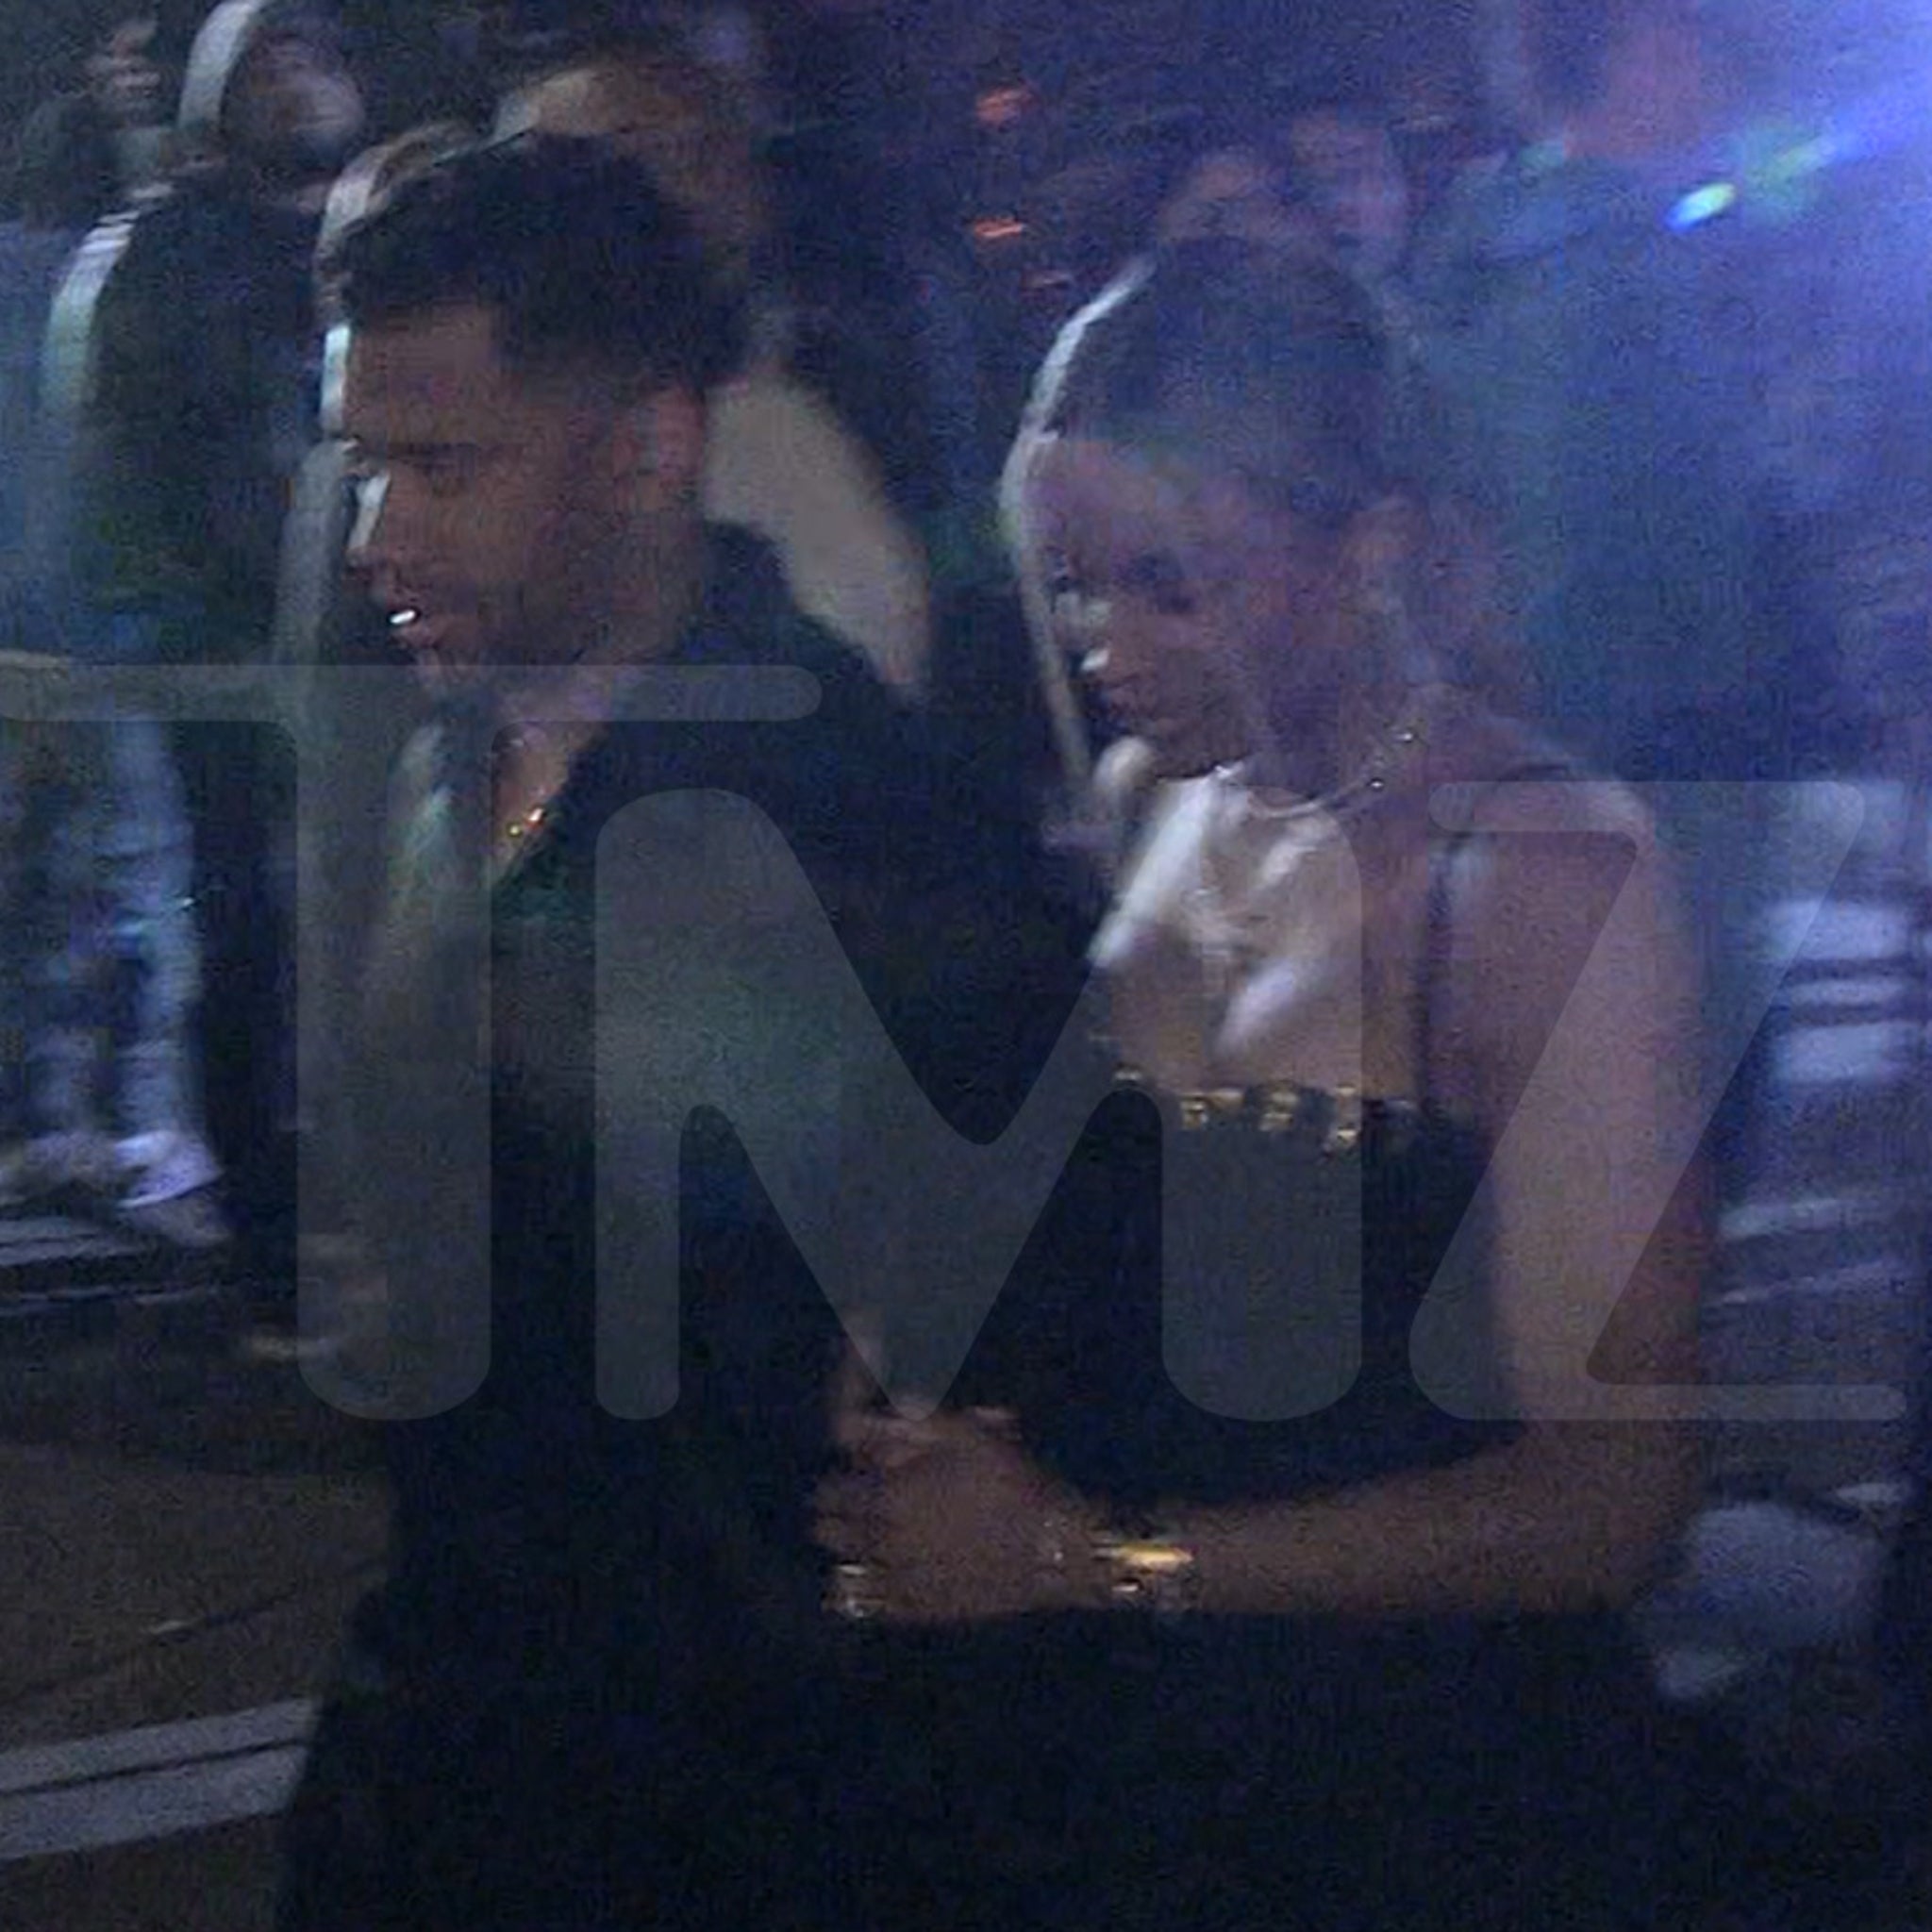 Ciara, Russell Wilson attend VIP Super Bowl party at Rao's LA